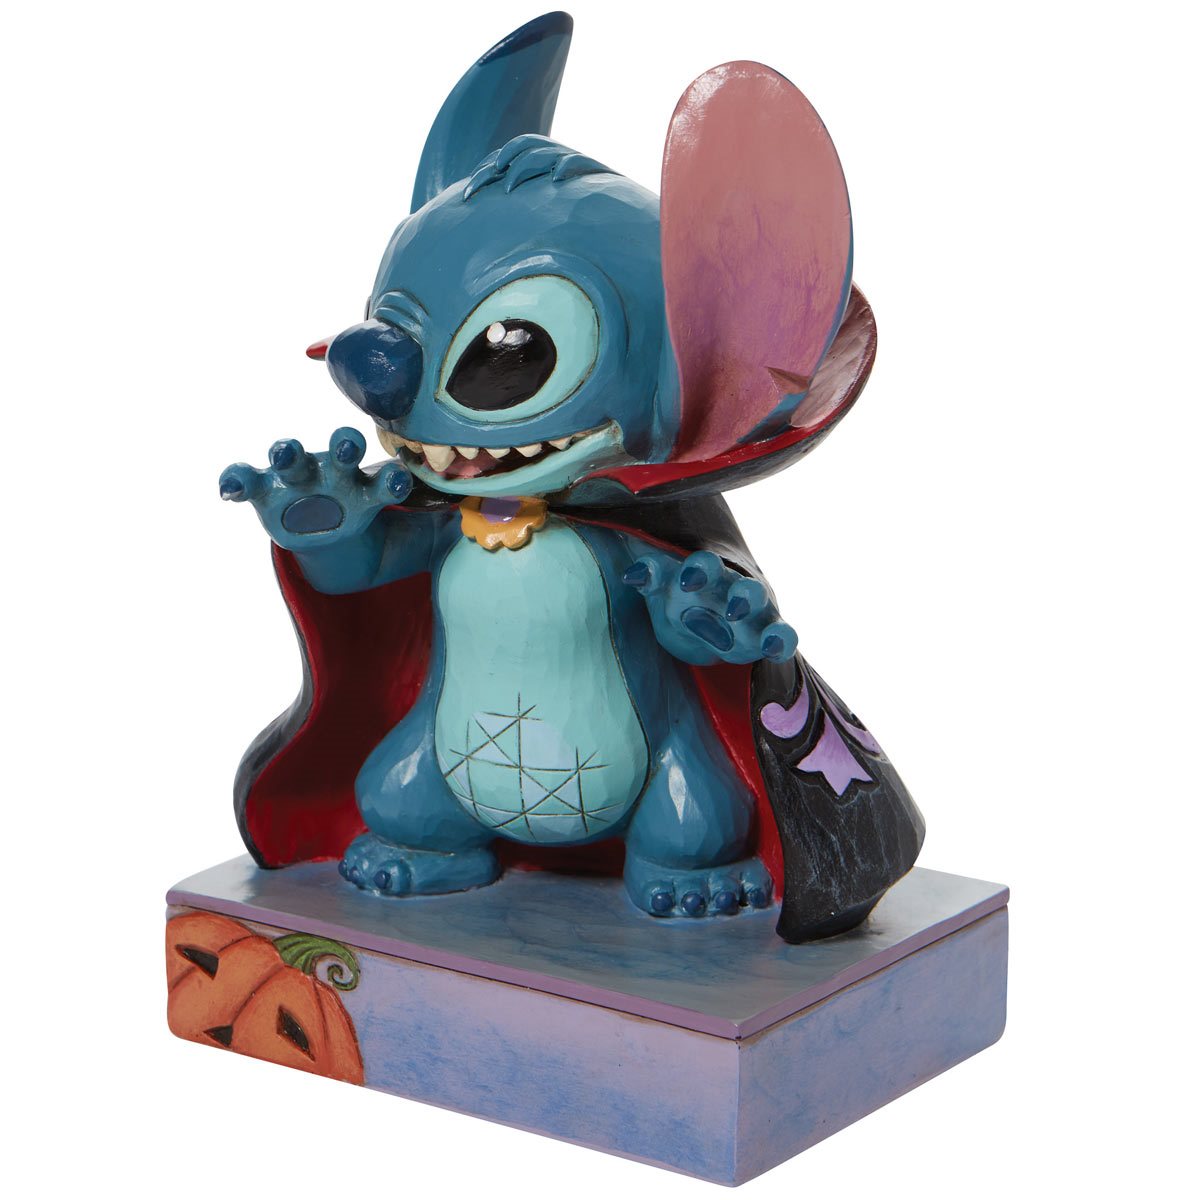 Mini Stitch Disney Traditions Figurine by Jim Shore – Gifts from